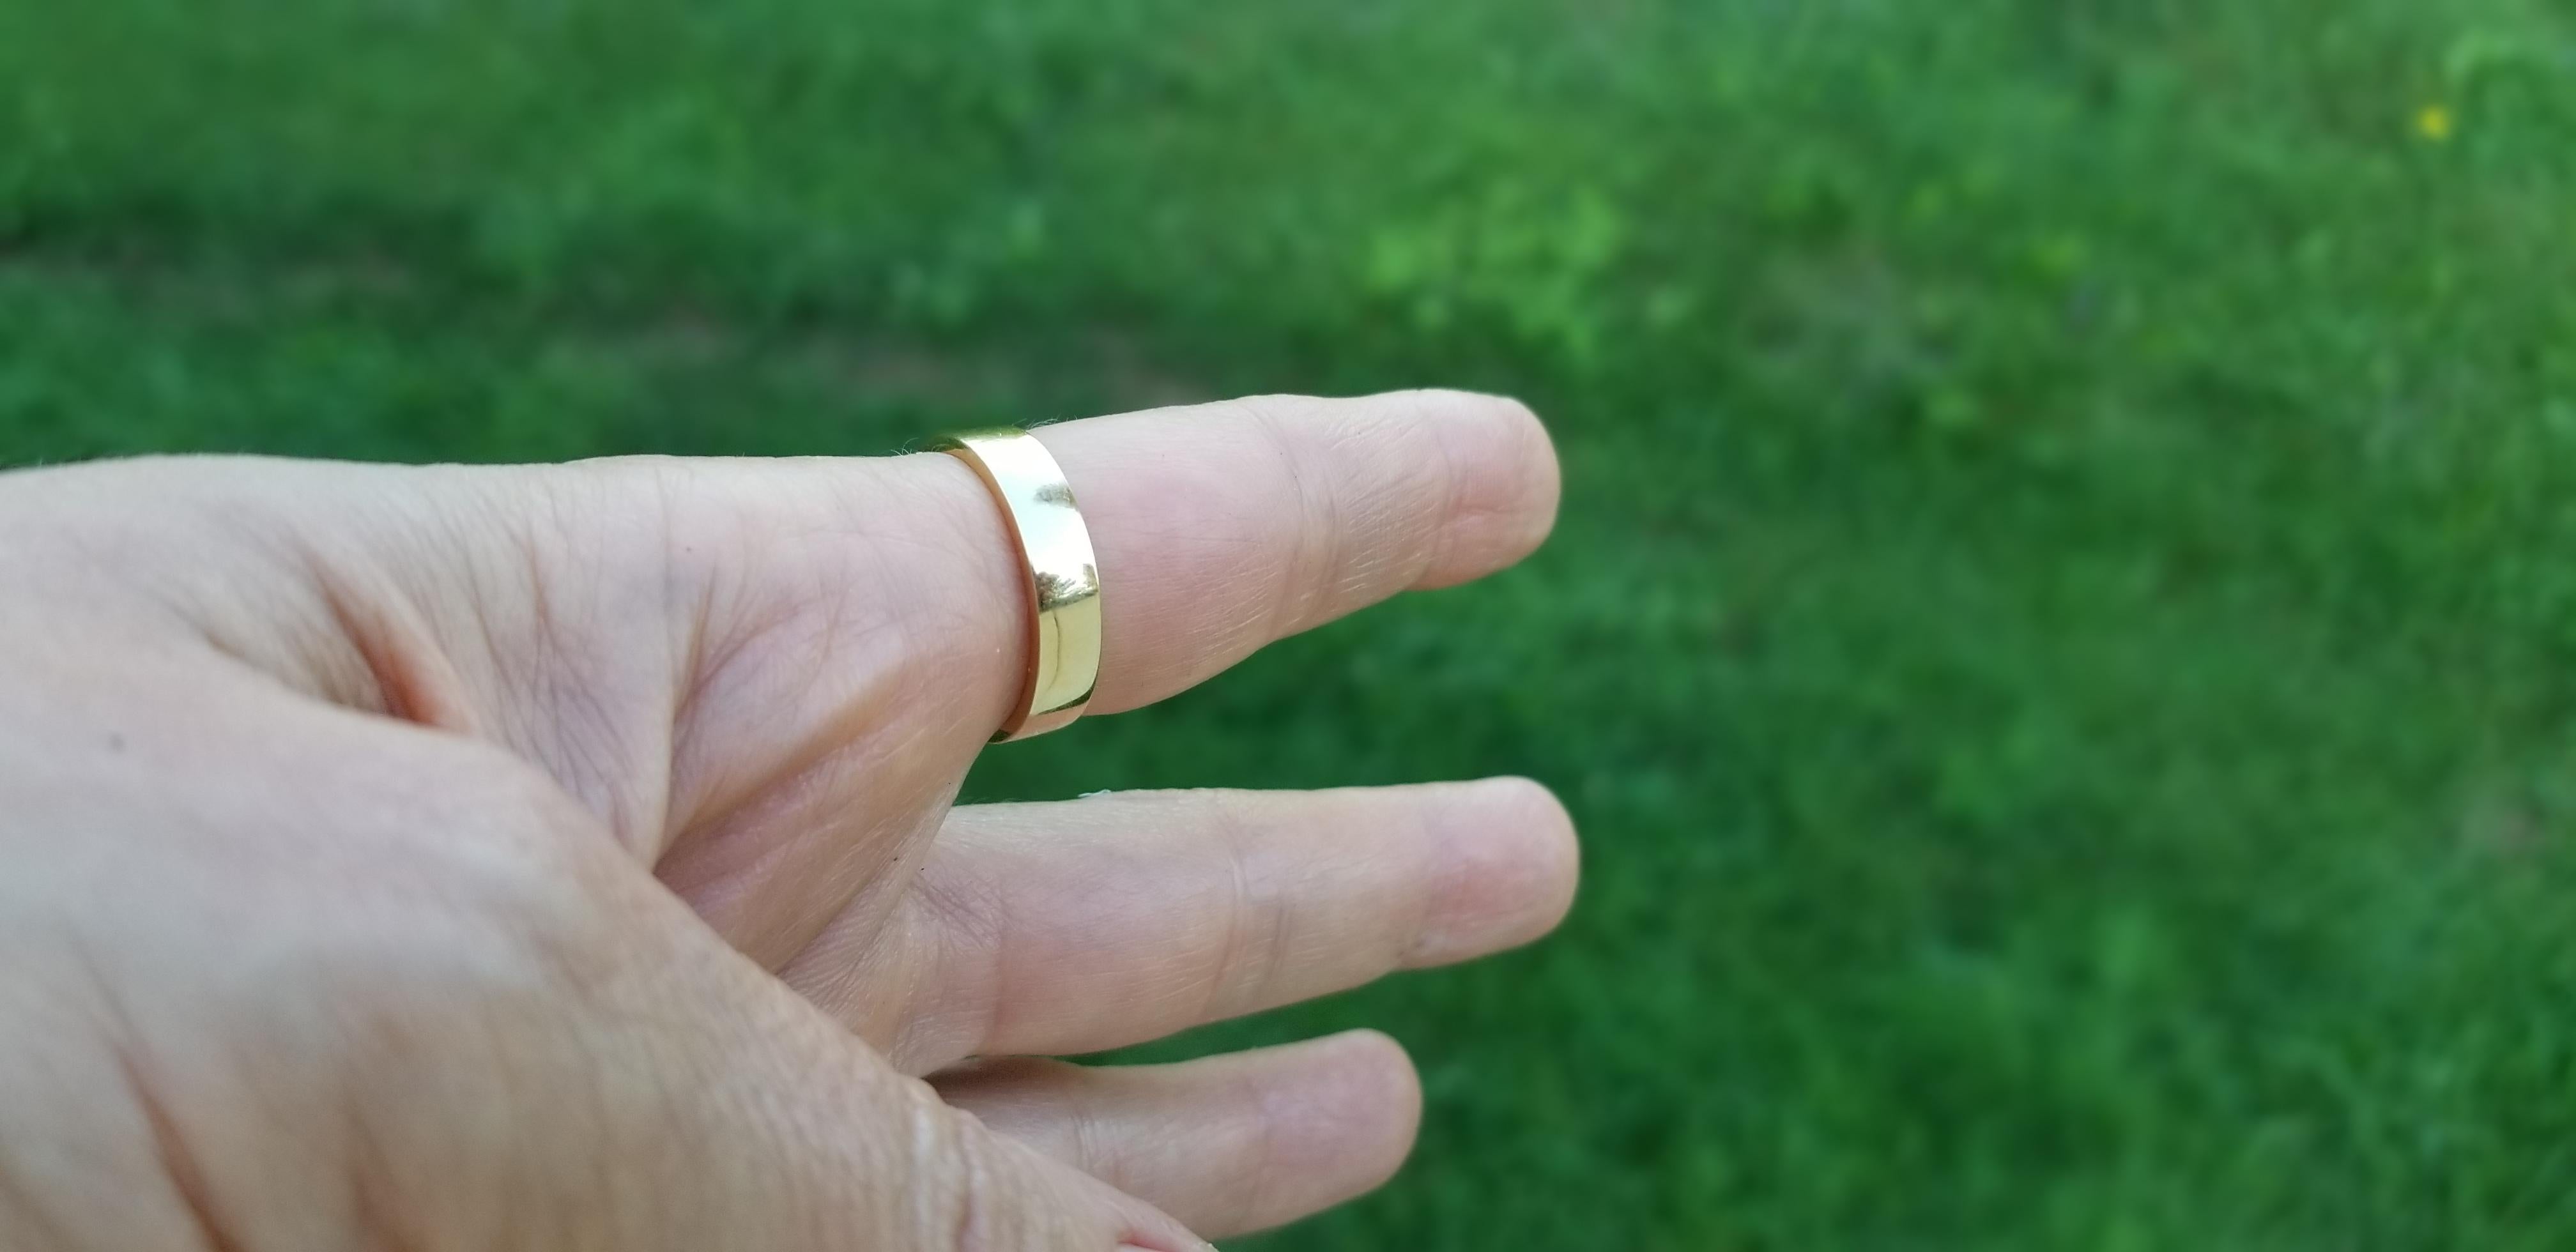 This smooth, solid 18k yellow gold band wraps comfortably around the finger.
It can be worn alone as a statement piece, or stacked together with other rings.
This ring was designed by Manya & Roumen in New York, and has never been worn.